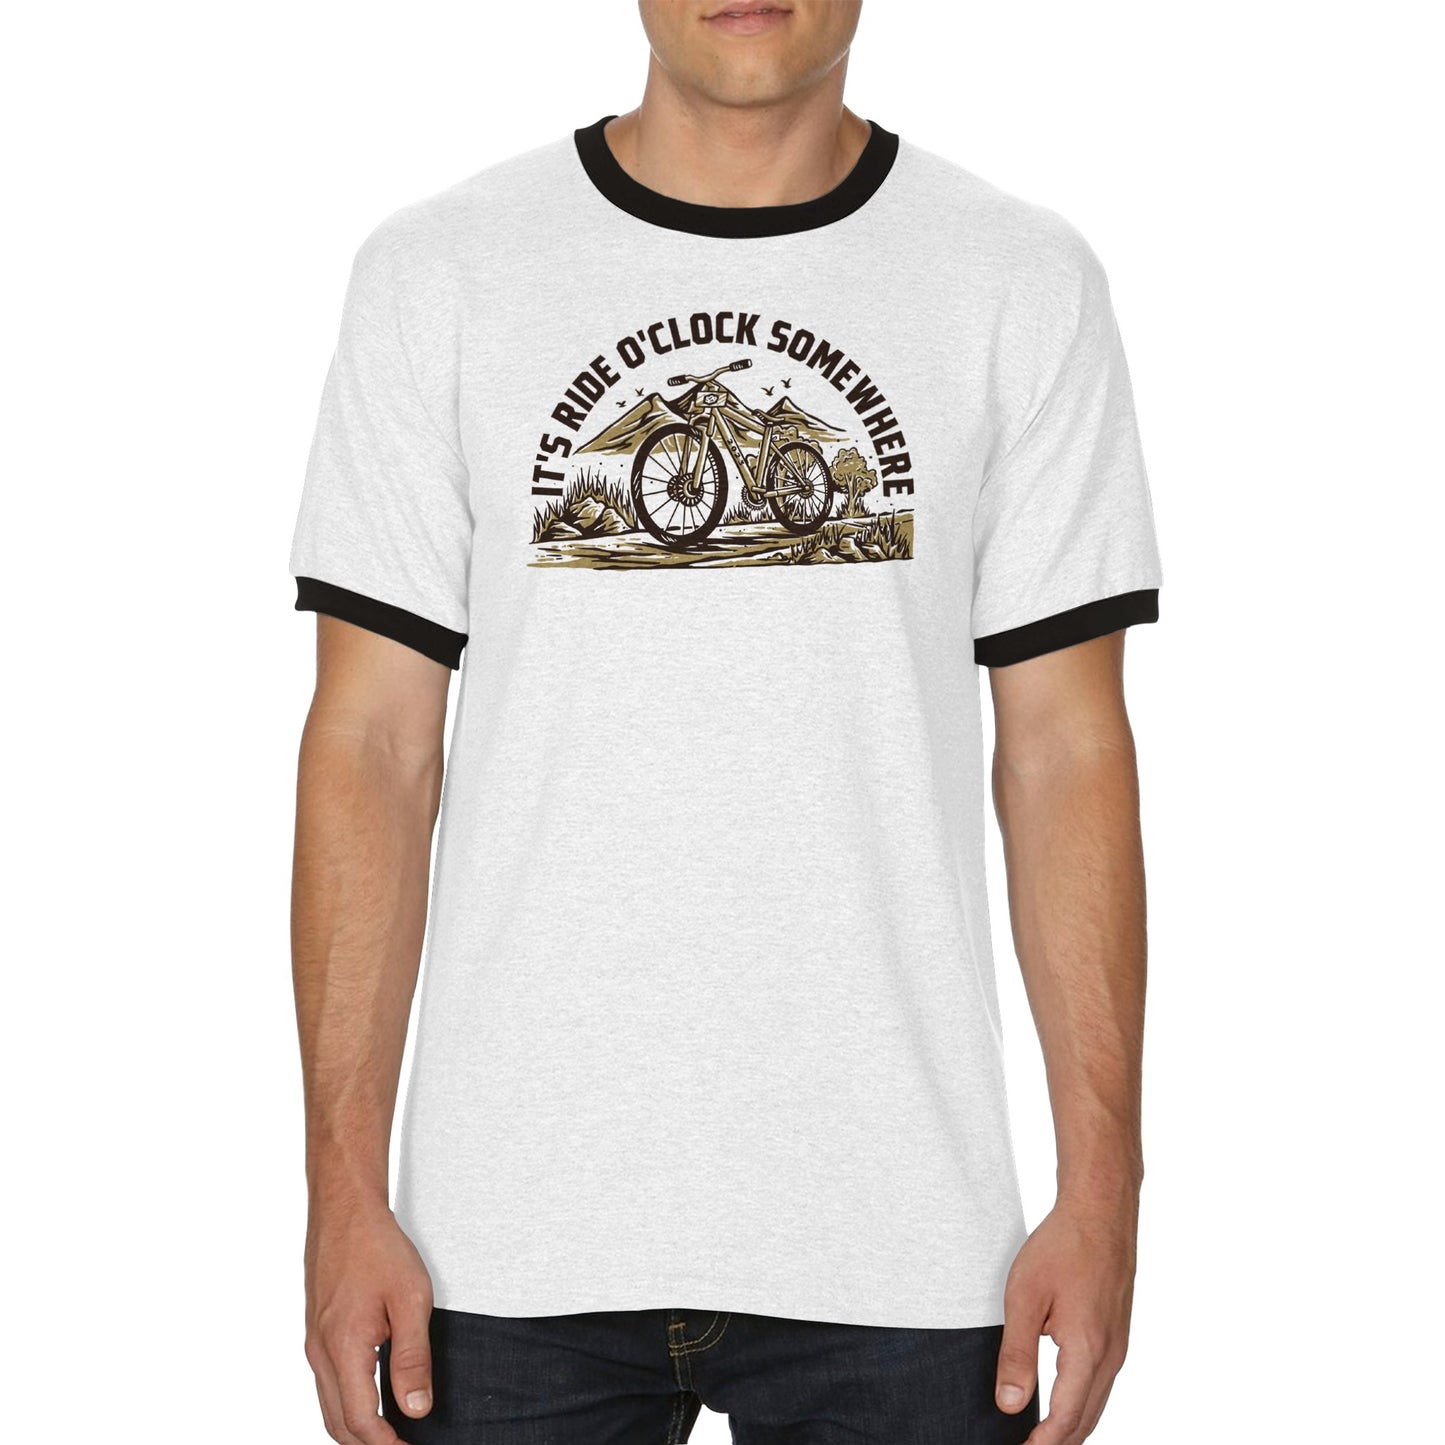 2023 Limited Edition "It's ride o'clock somewhere" Unisex Ringer T-shirt